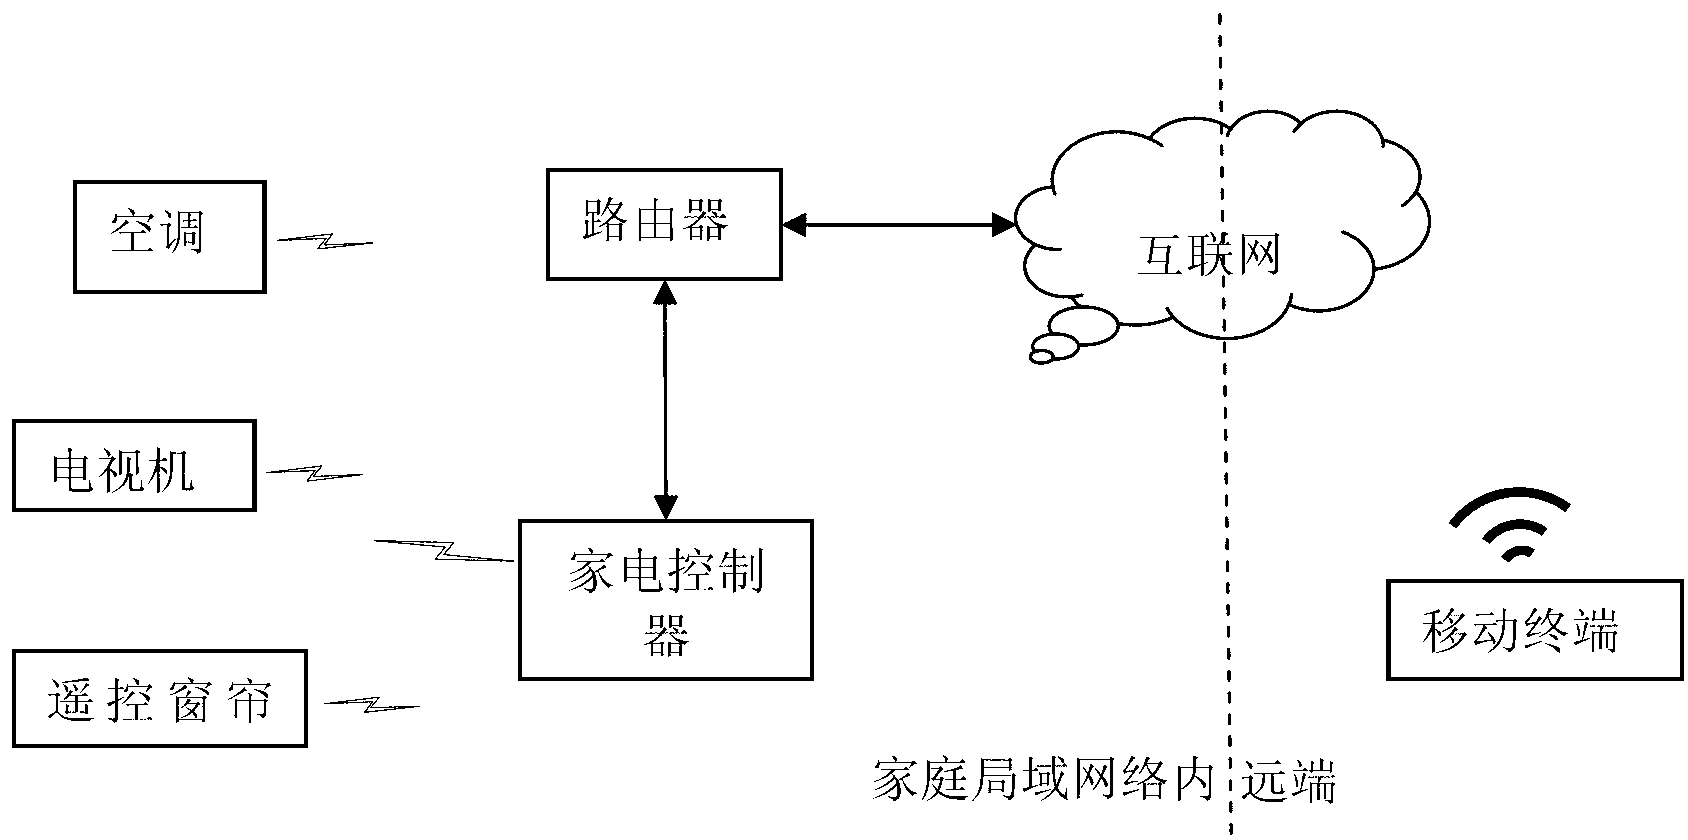 Method, system and household electrical appliance controller for controlling traditional household electrical appliances